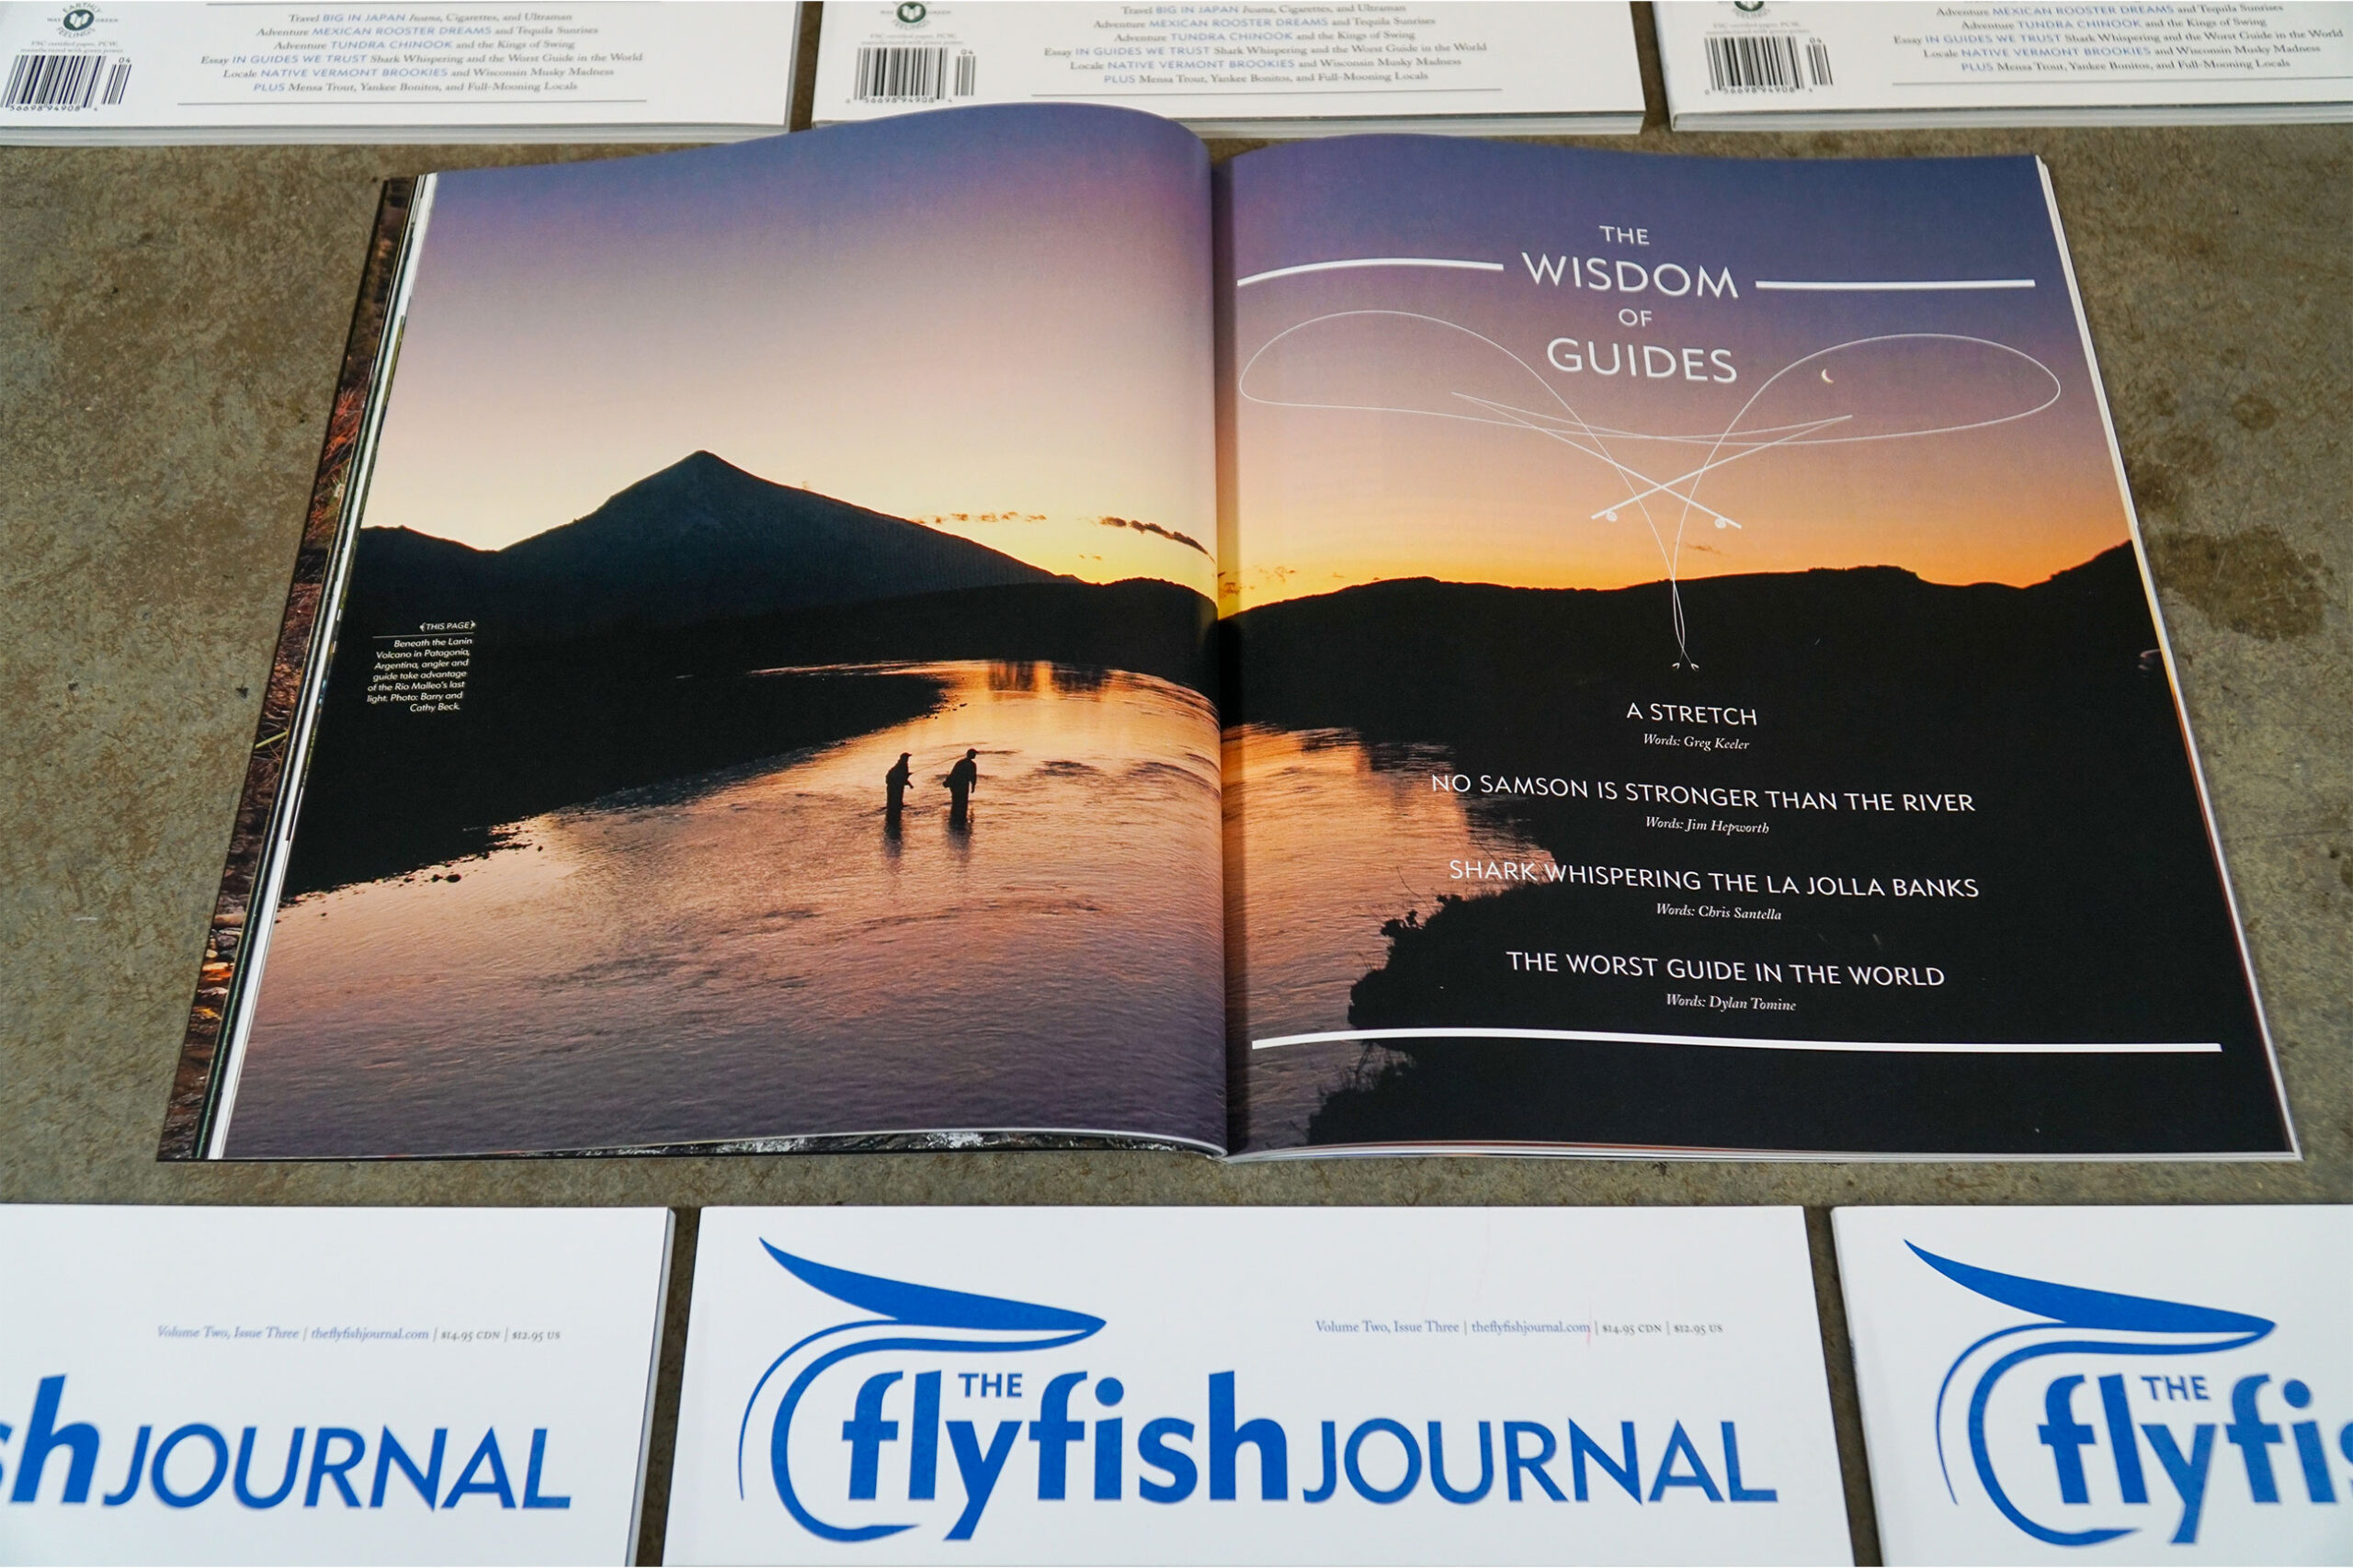 The Flyfish Journal Volume 2 Issue 3 Feature The Wisdom of Guides